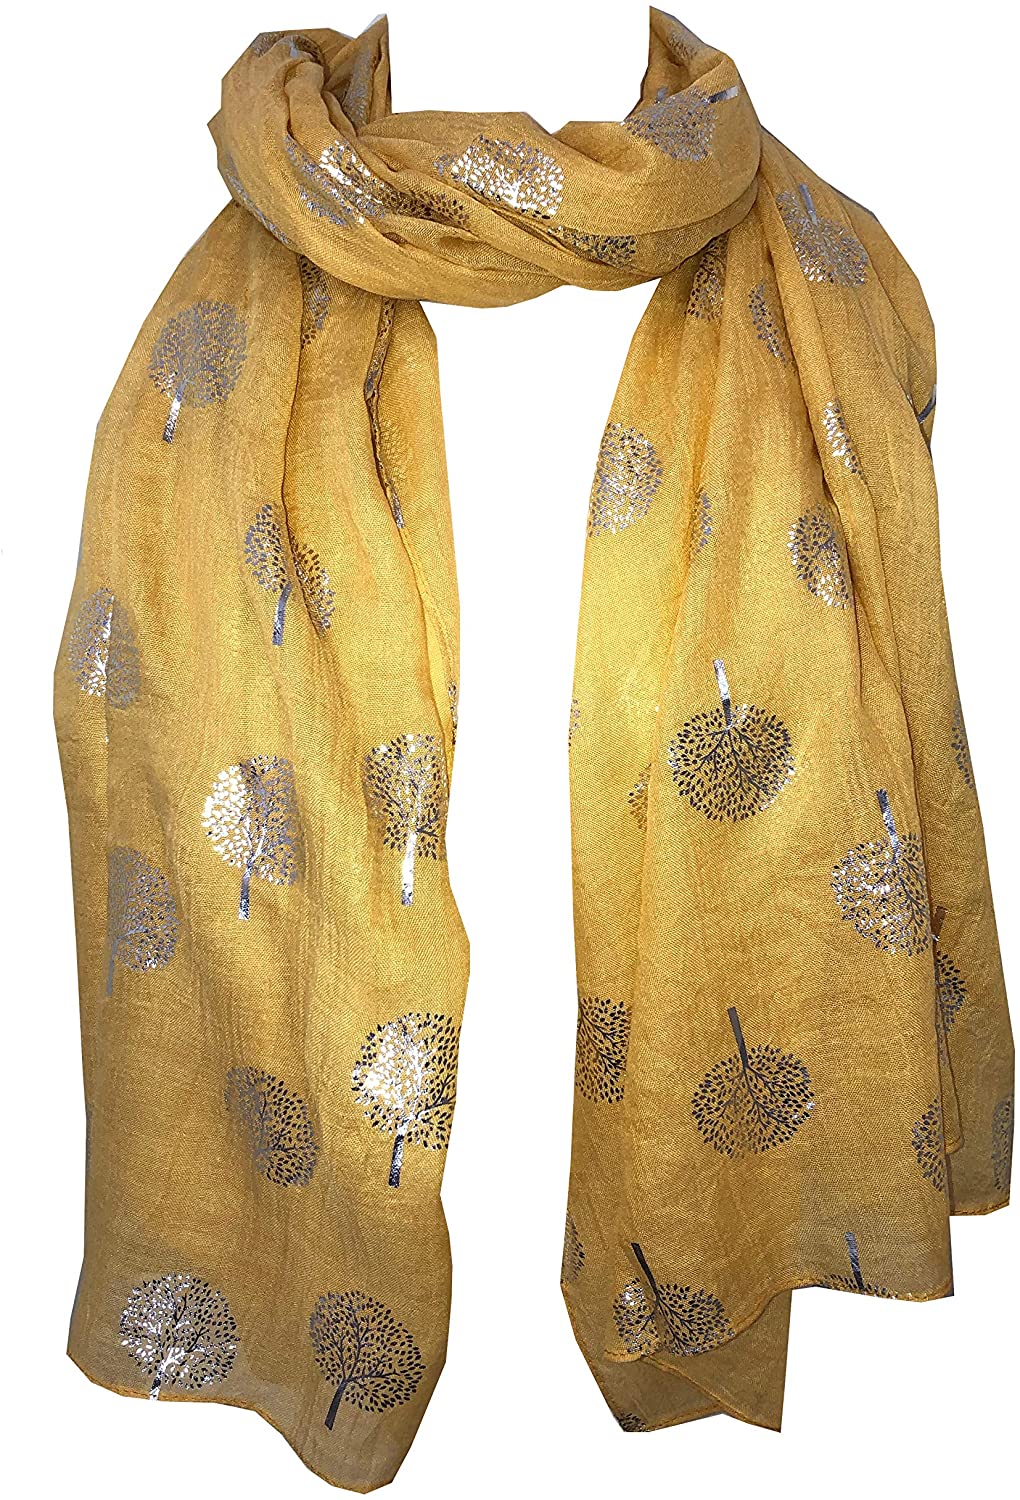 Pamper Yourself Now Mustard with Silver Foiled Mulberry Tree Design Ladies Scarf/wrap. Great Present for Mum, Sister, Girlfriend or Wife.